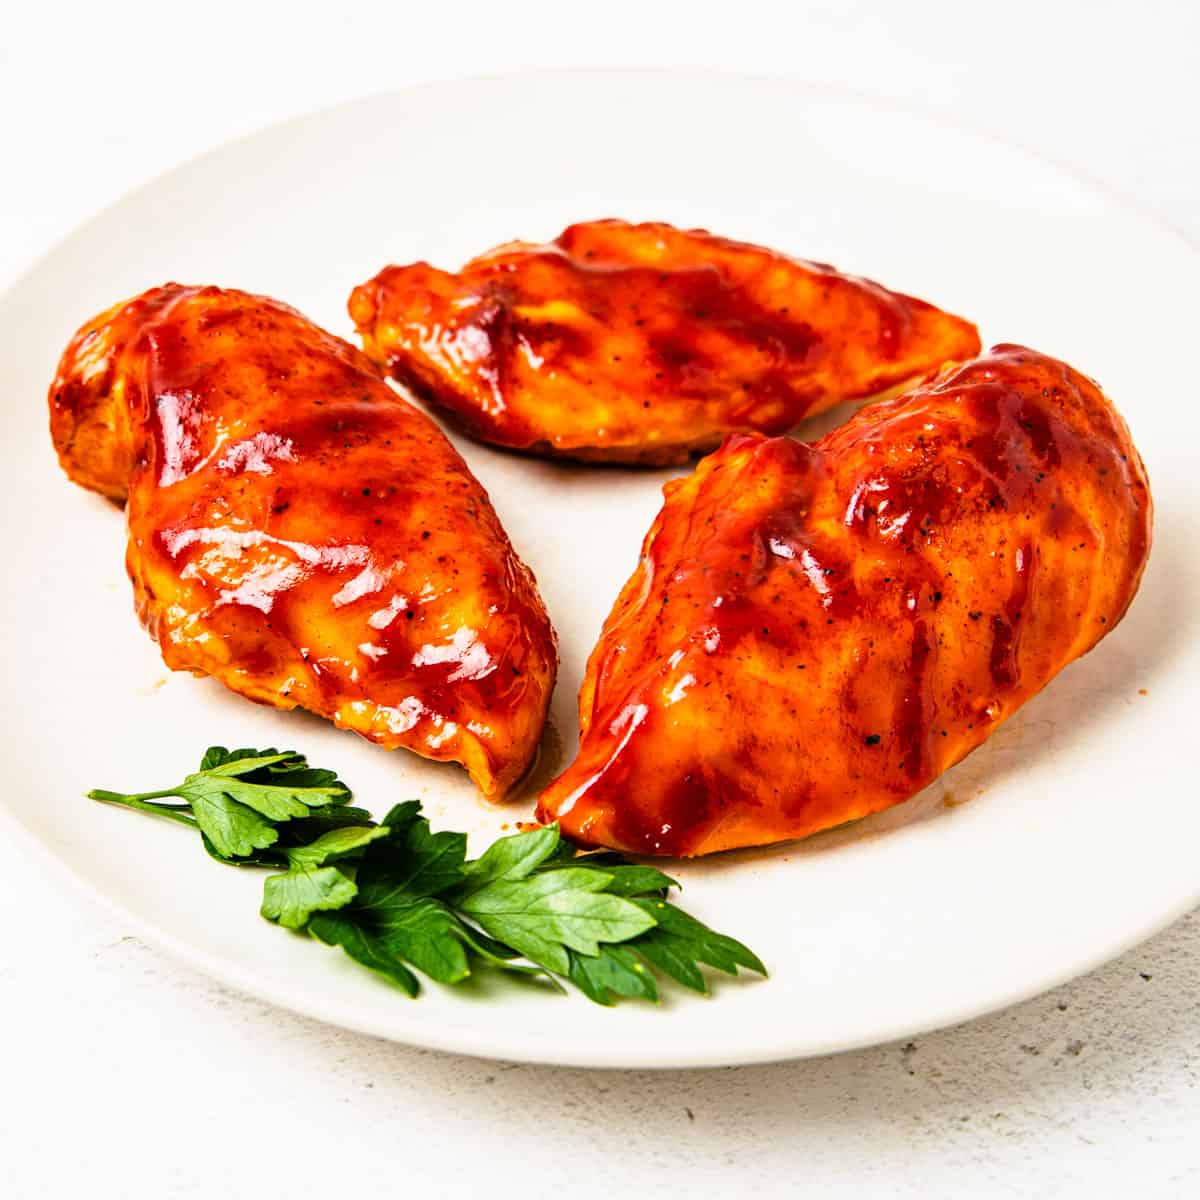 Barbecue chicken breasts arranged on a serving plate.